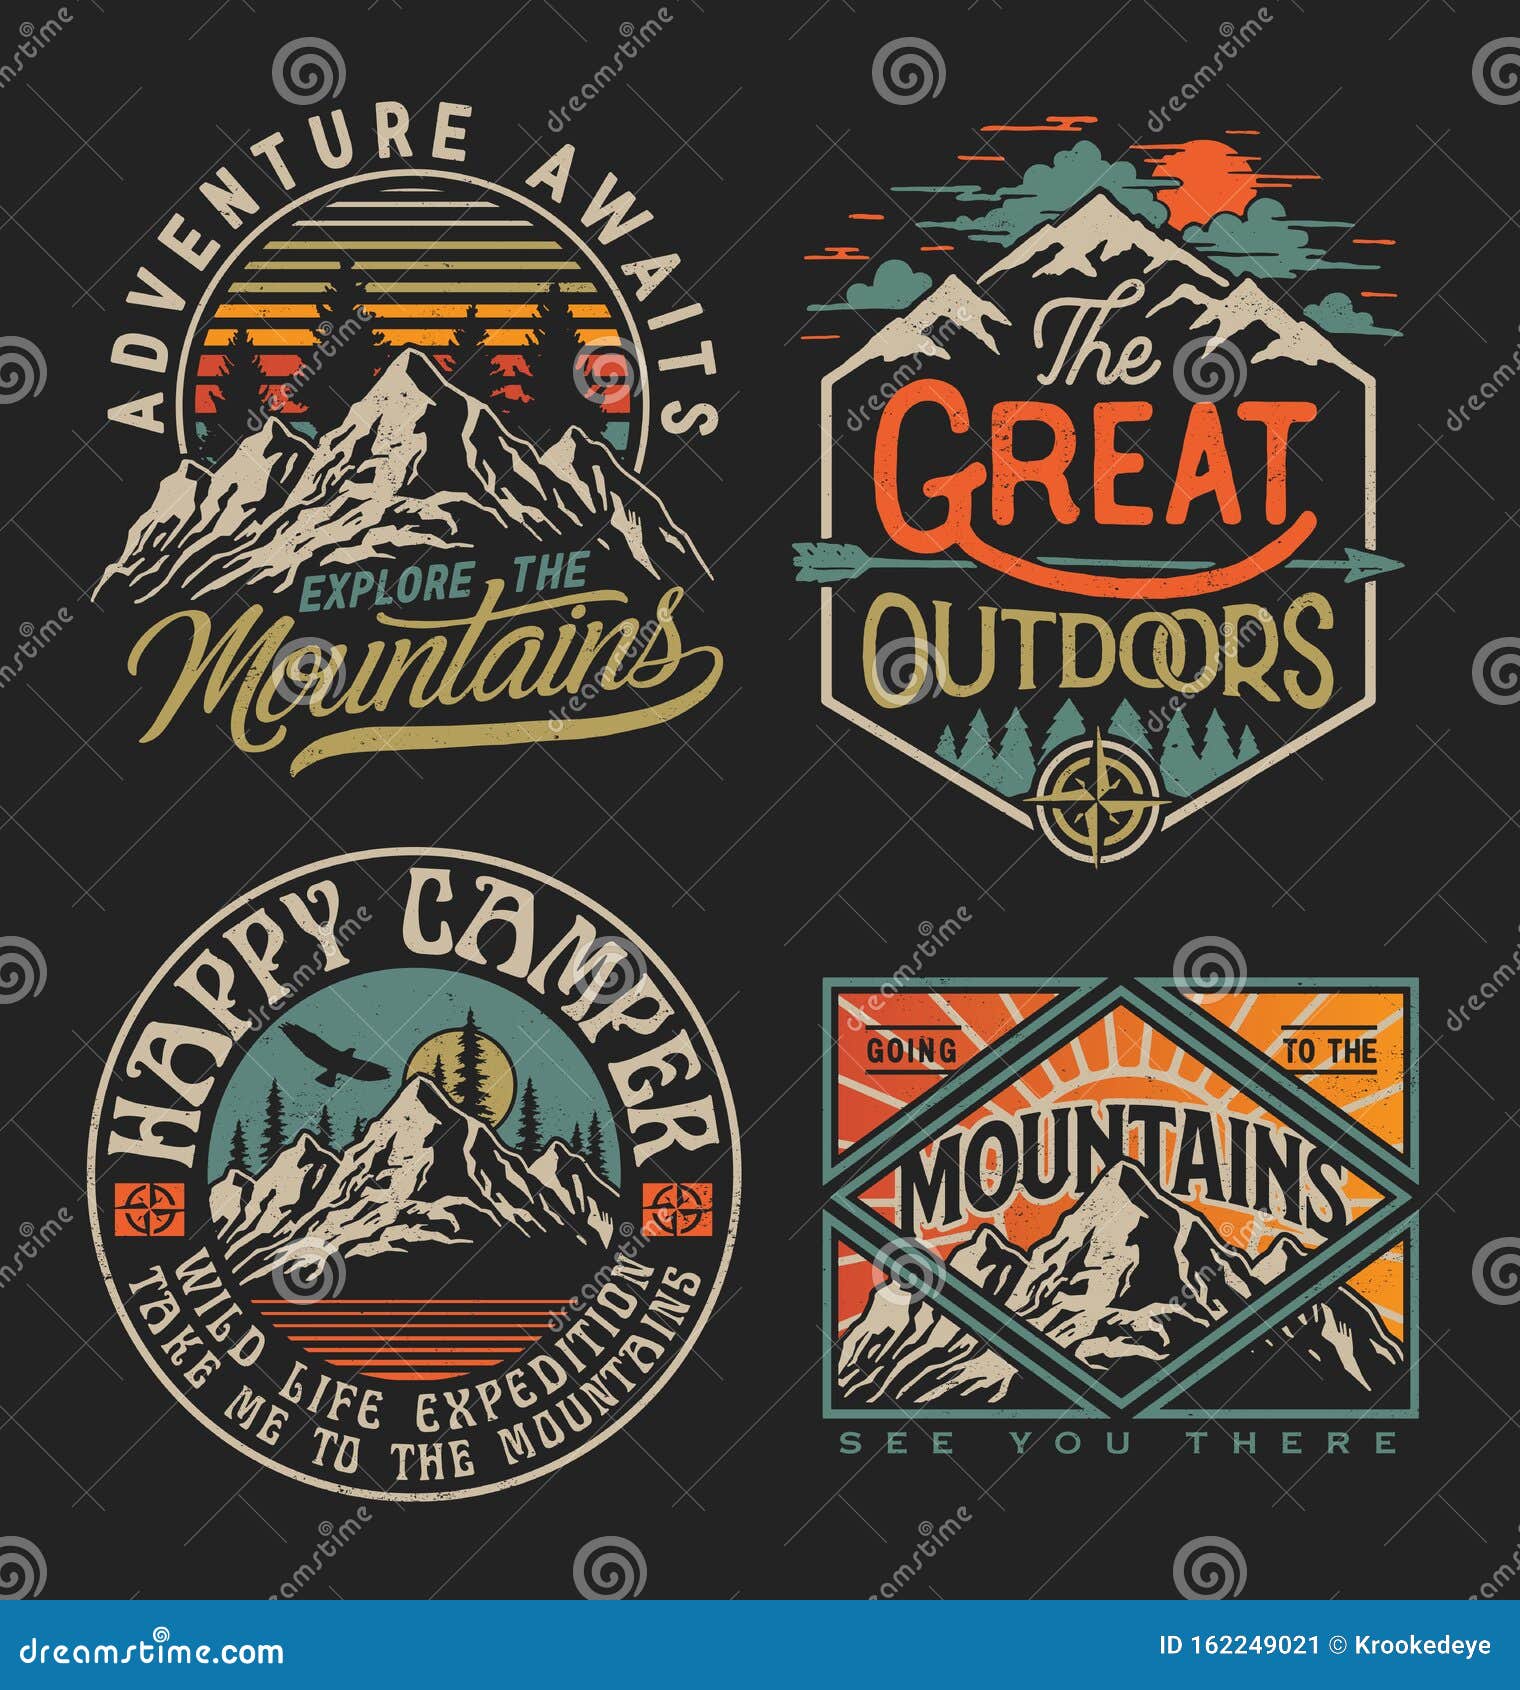 collection of vintage explorer, wilderness, adventure, camping emblem graphics. perfect for t-shirts, apparel and other merchandis